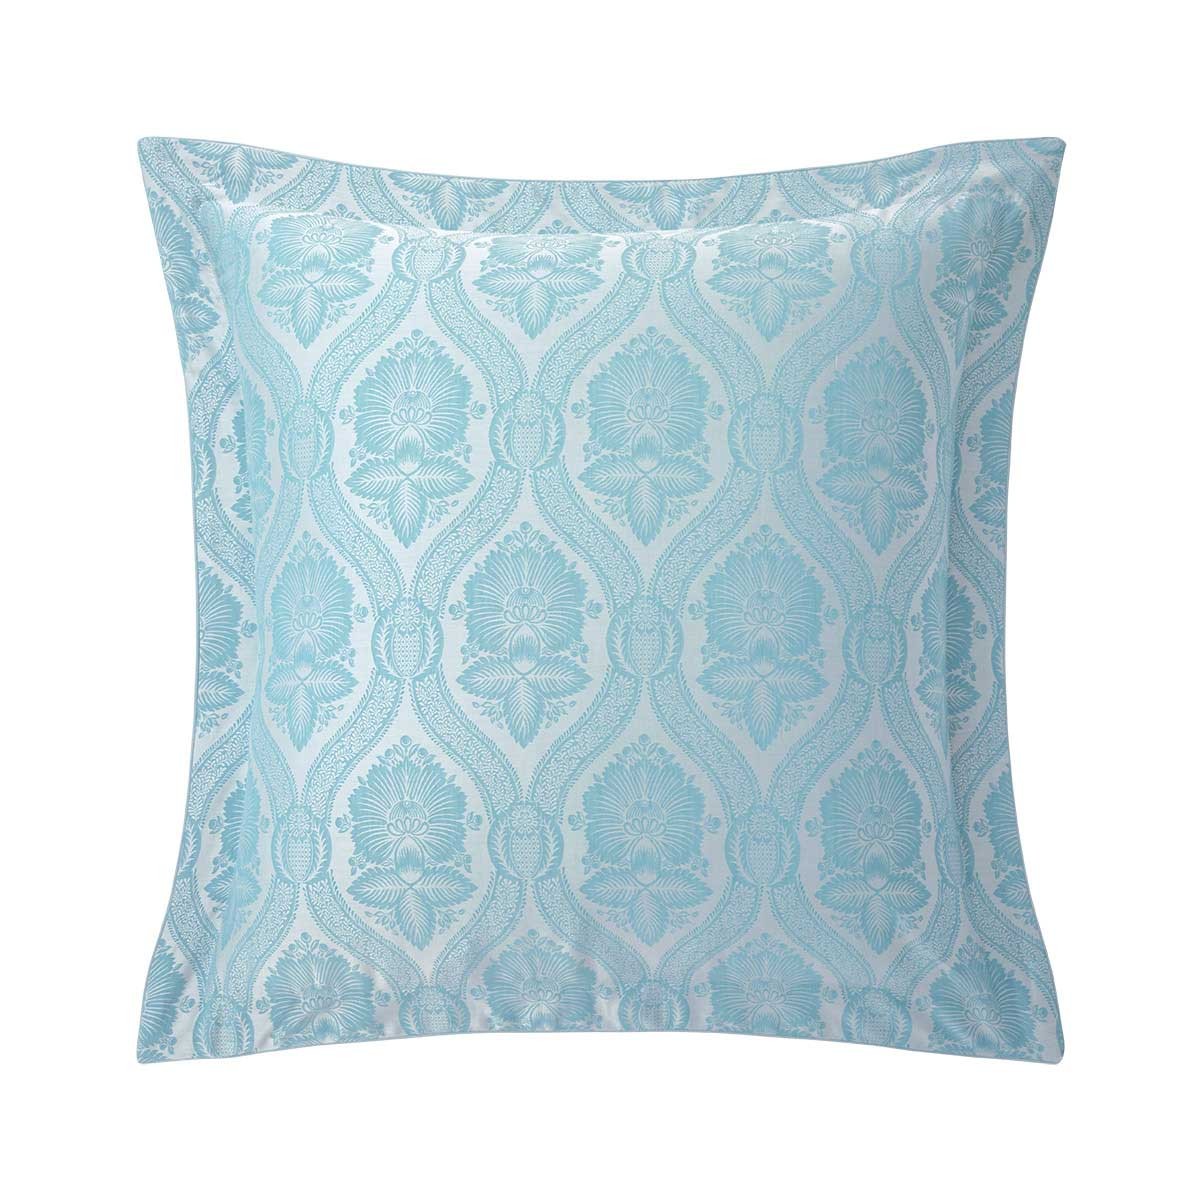 Tranquility Bleu Delorme Nil Embrace Bed Yves Collection |